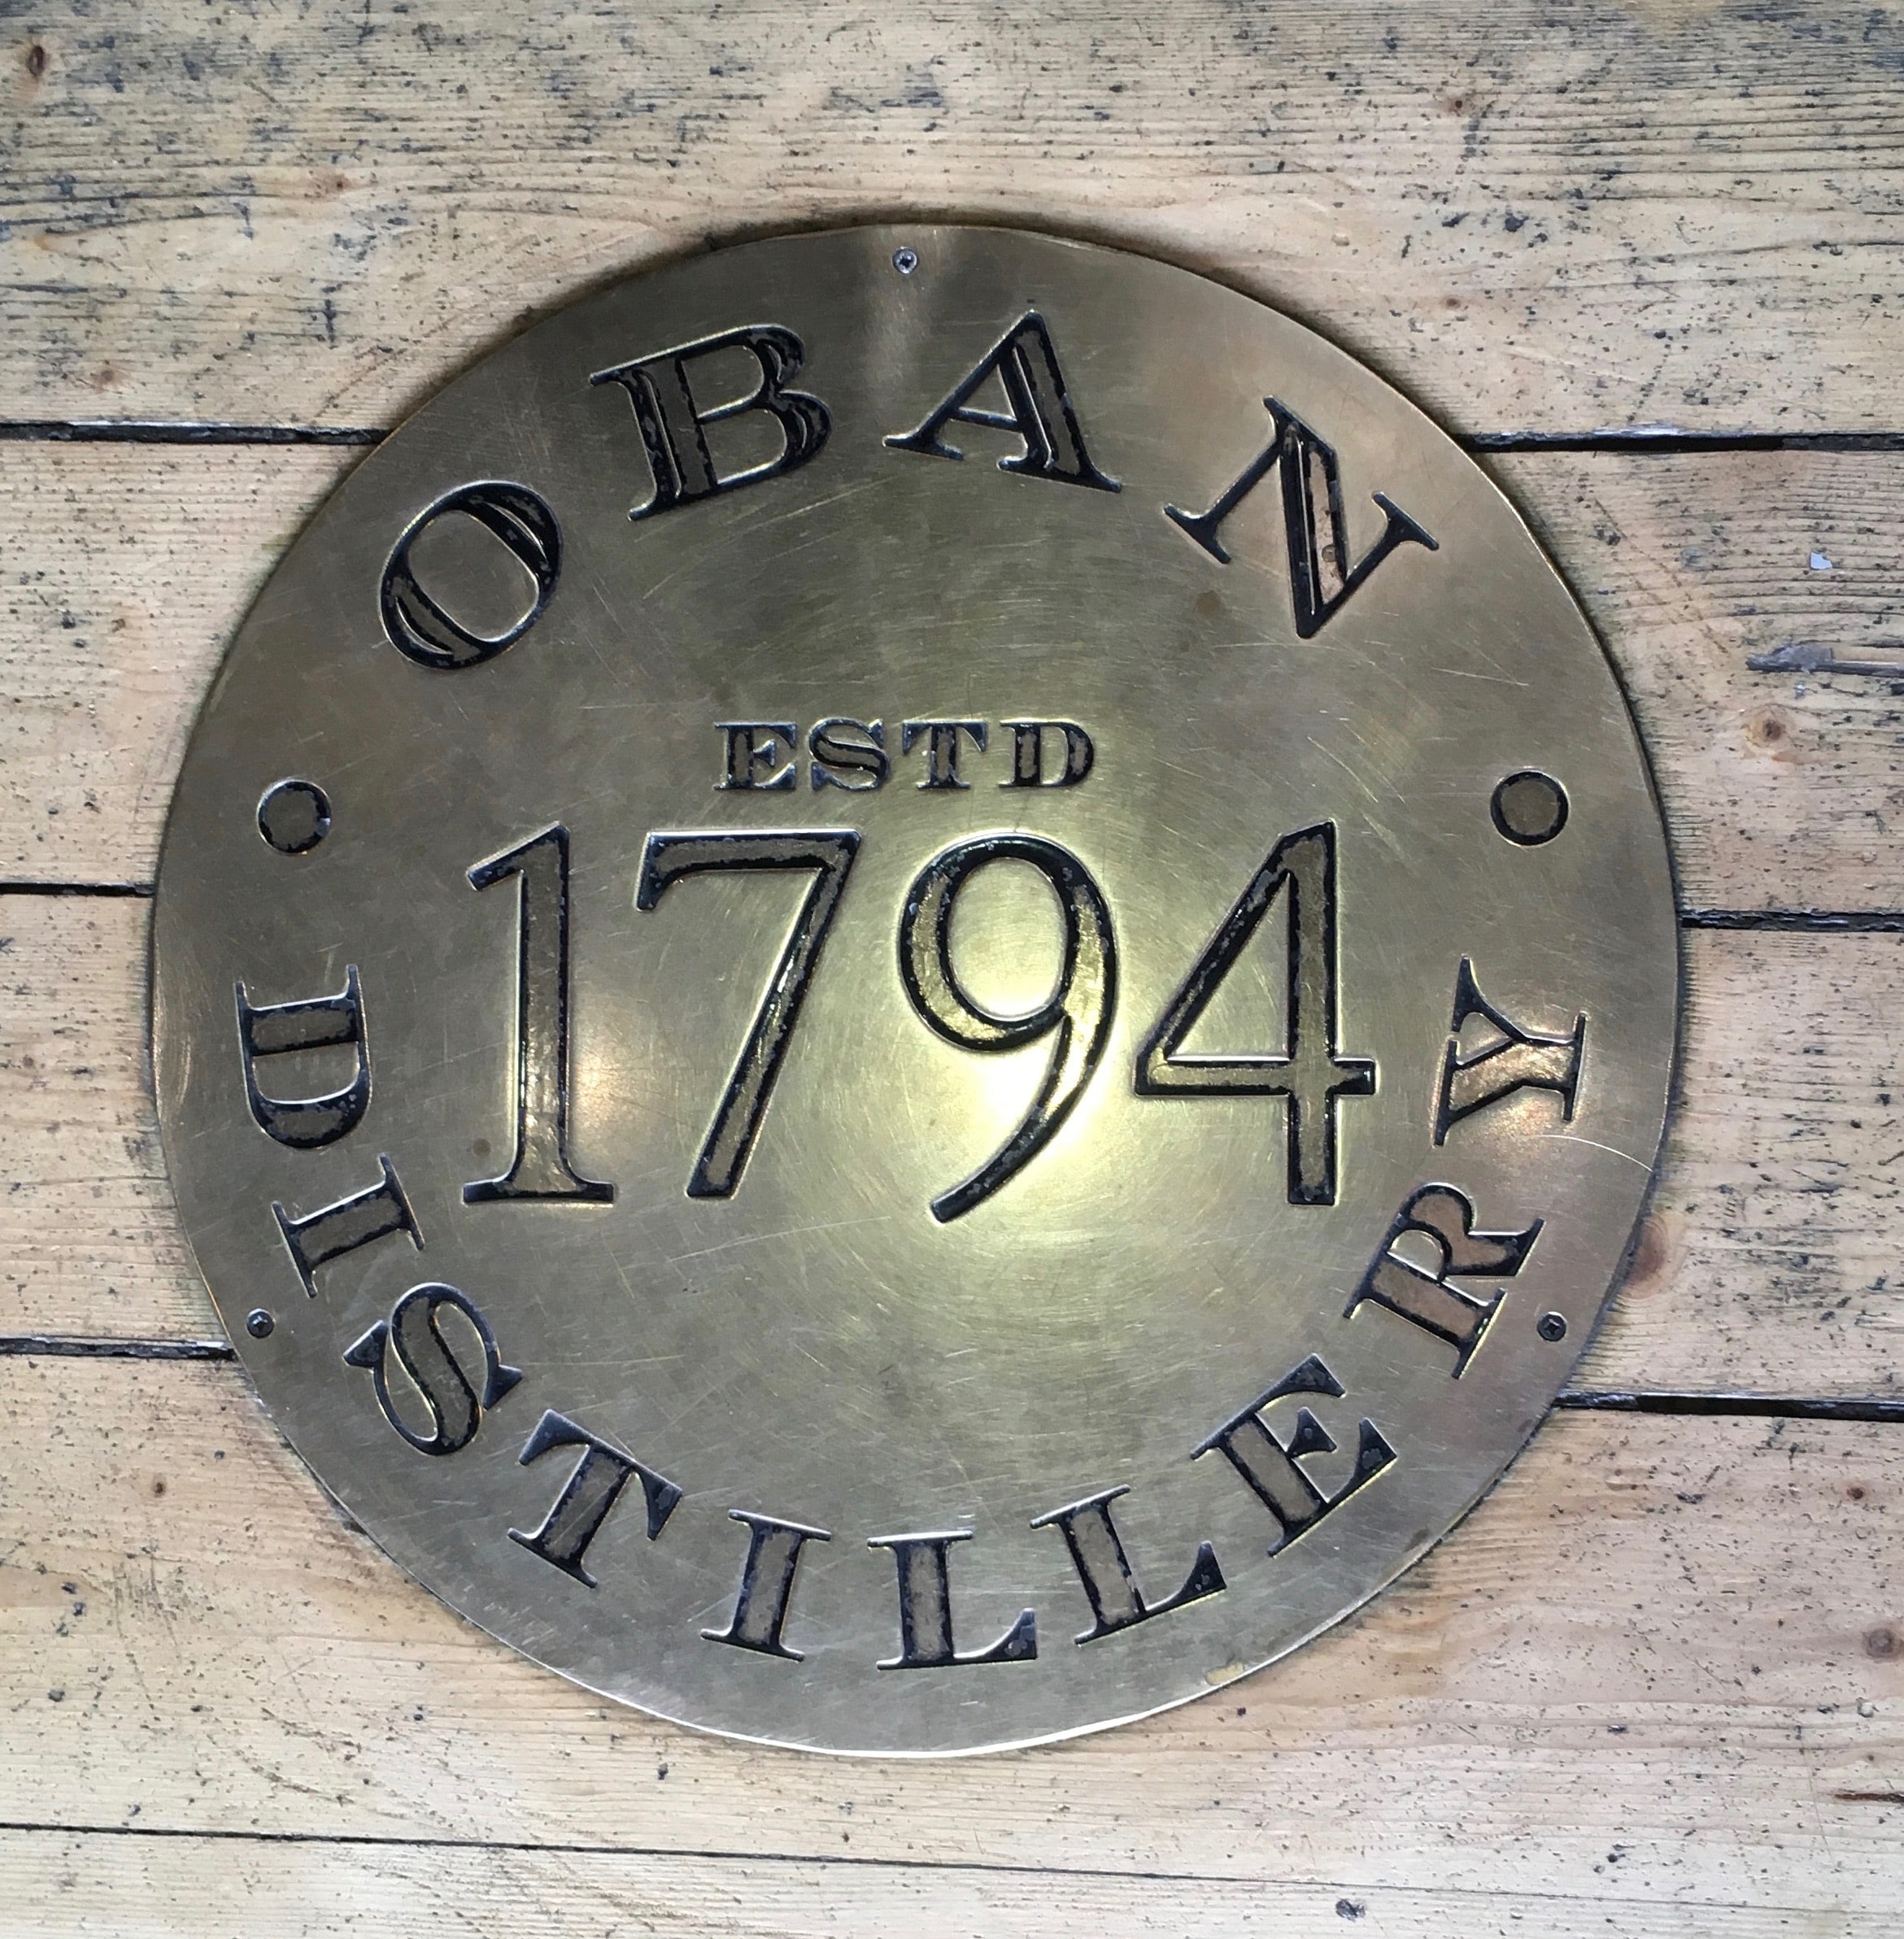 Oban distillery plaque noting the whisky name and 1794 date of establishment.